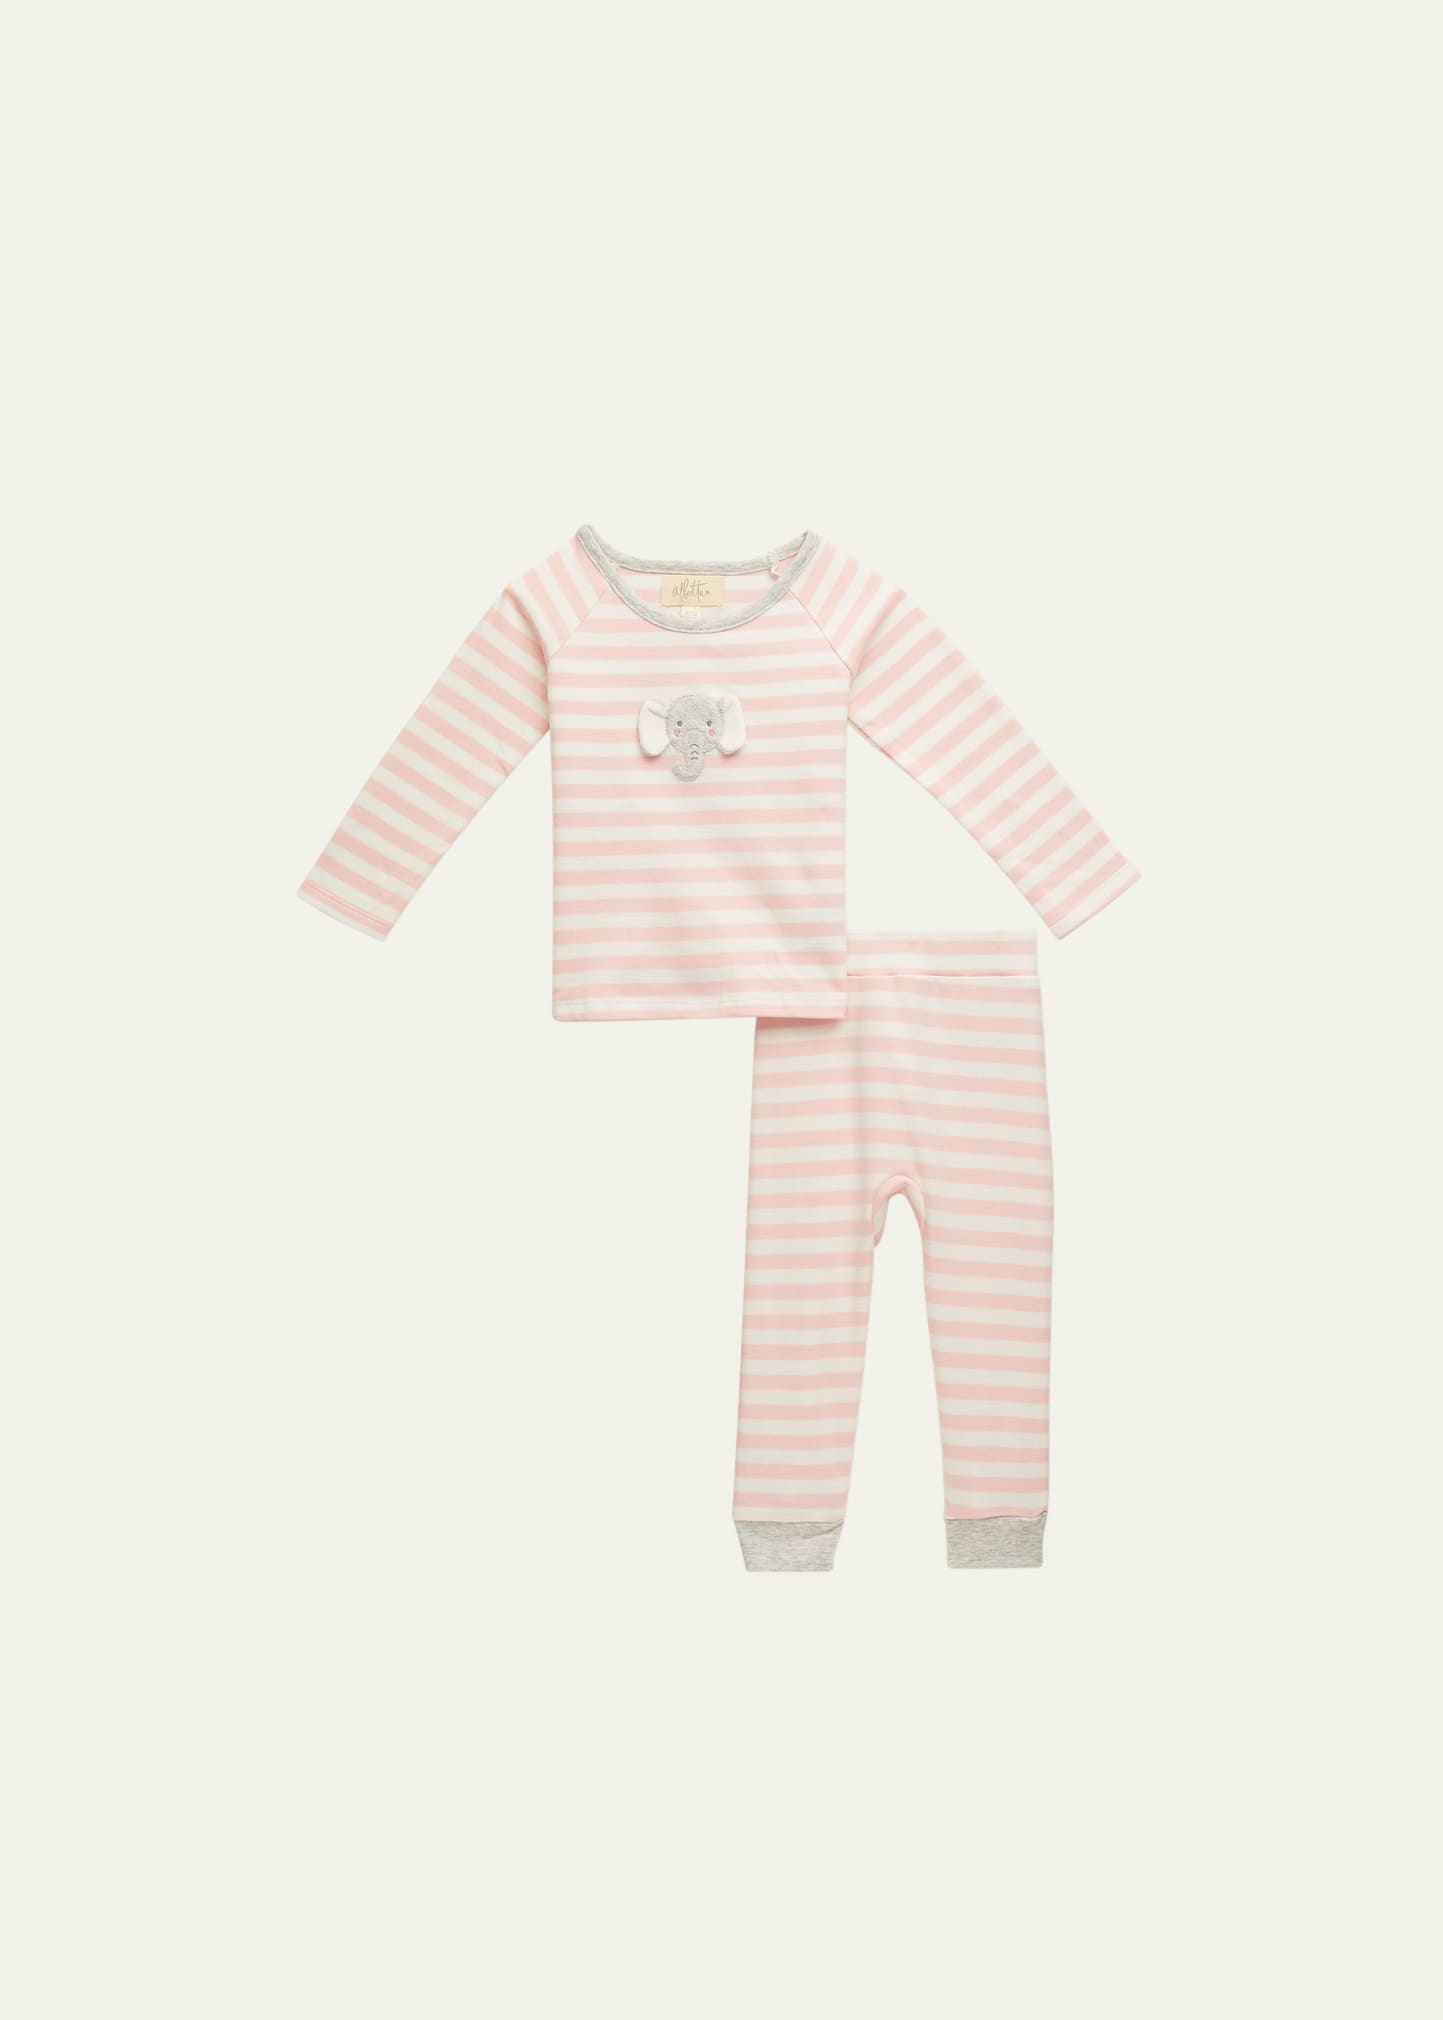 Albetta Kids' Girl's Estelle Crotched Elephant Striped Two-piece Pajamas In Light Pink